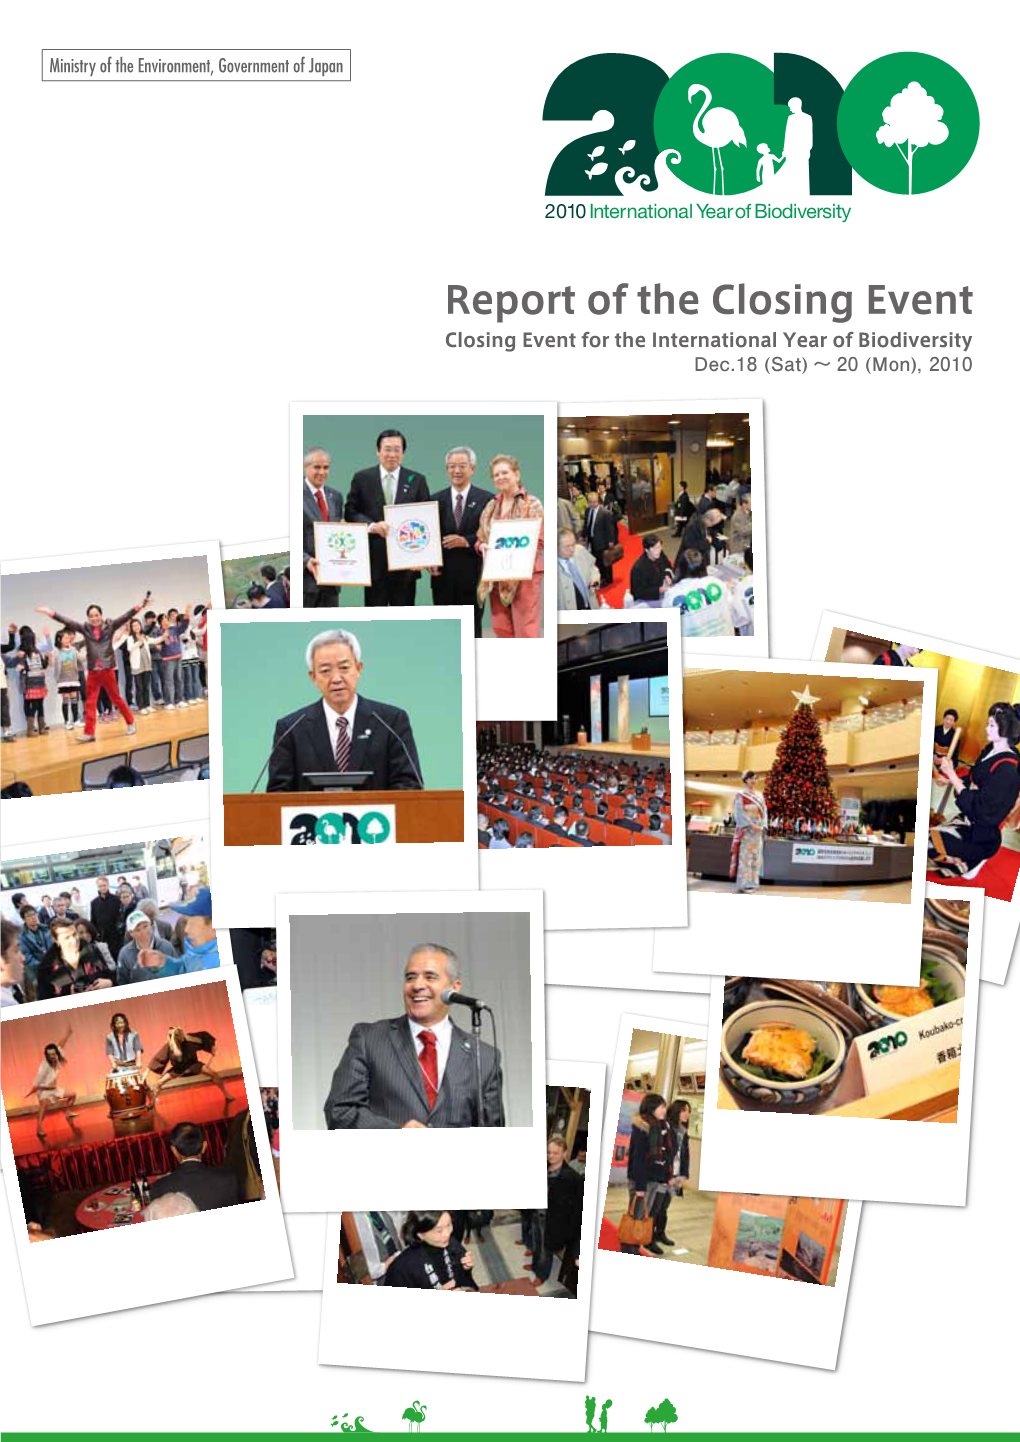 Report of the Closing Event Closing Event for the International Year of Biodiversity Dec.18 (Sat) 〜 20 (Mon), 2010 年 国際生物多様性年